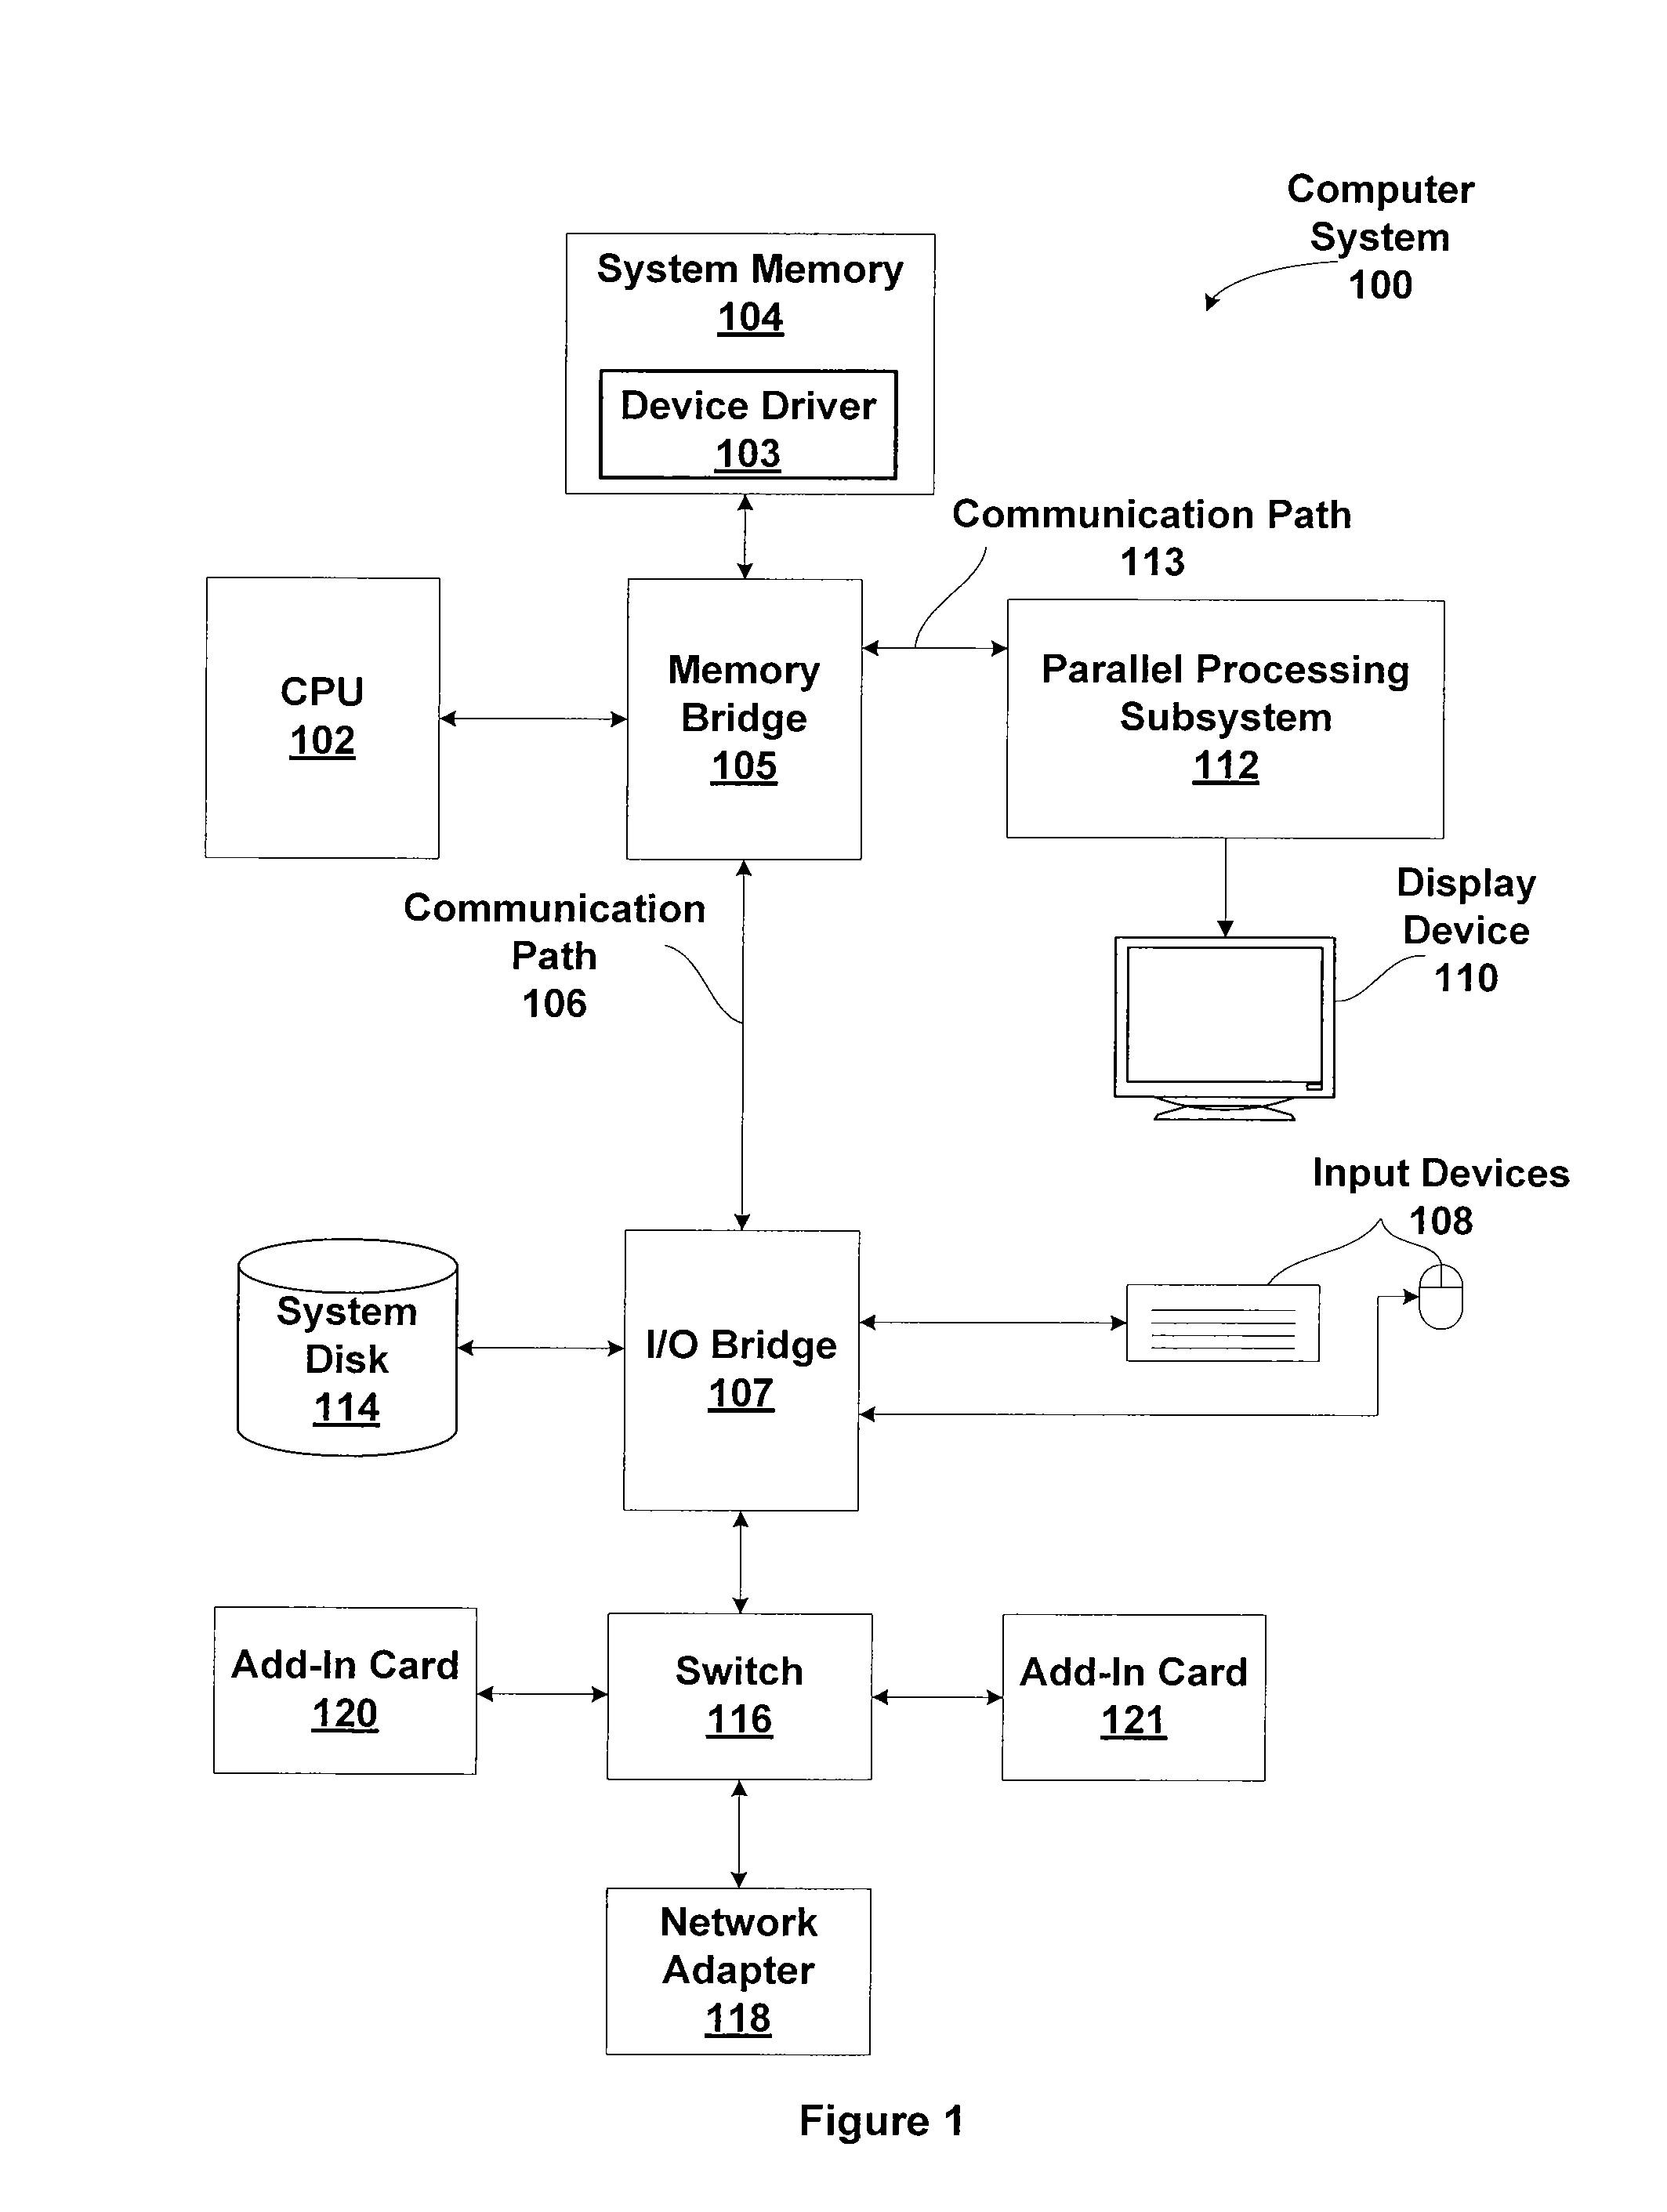 Caching of adaptively sized cache tiles in a unified l2 cache with surface compression